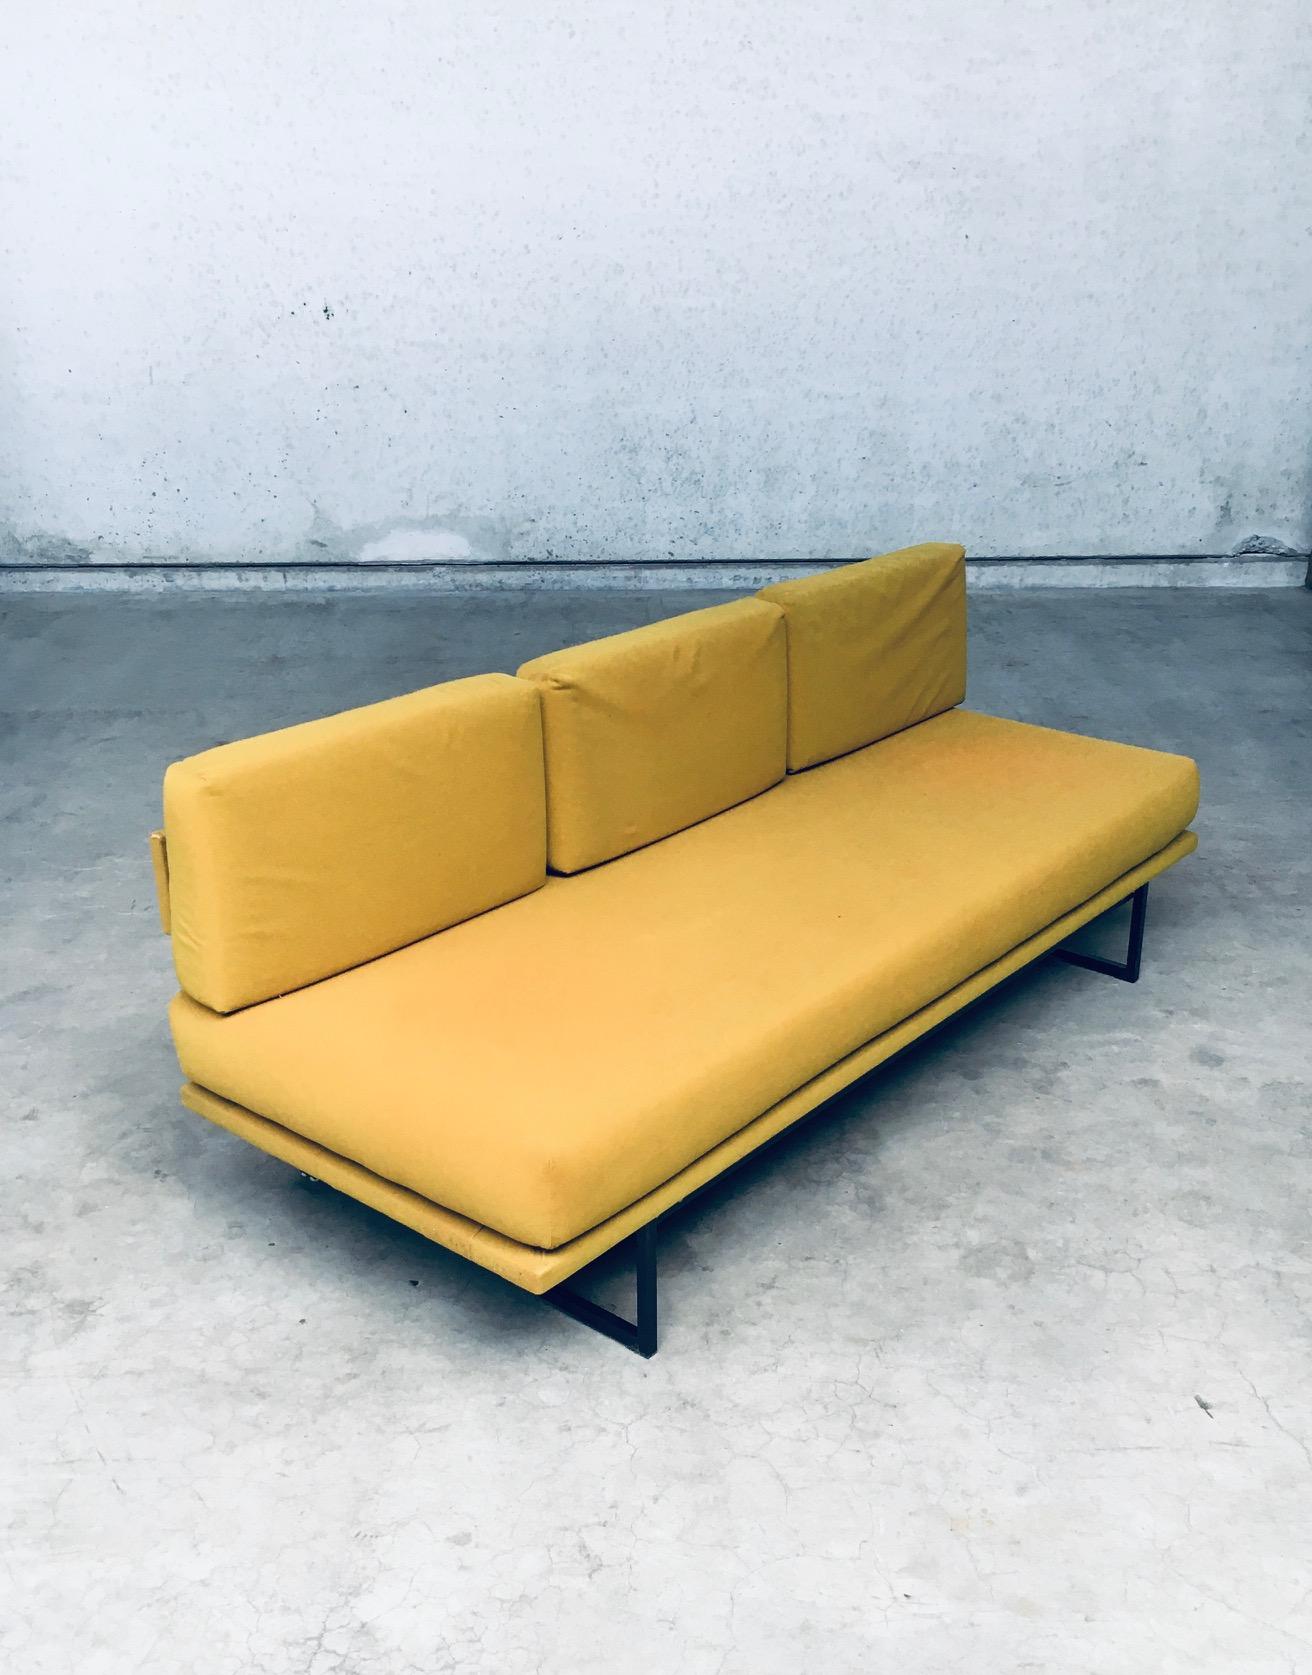 1960's Midcentury Modern Dutch Design 3 Seat Sofa Bench In Good Condition For Sale In Oud-Turnhout, VAN